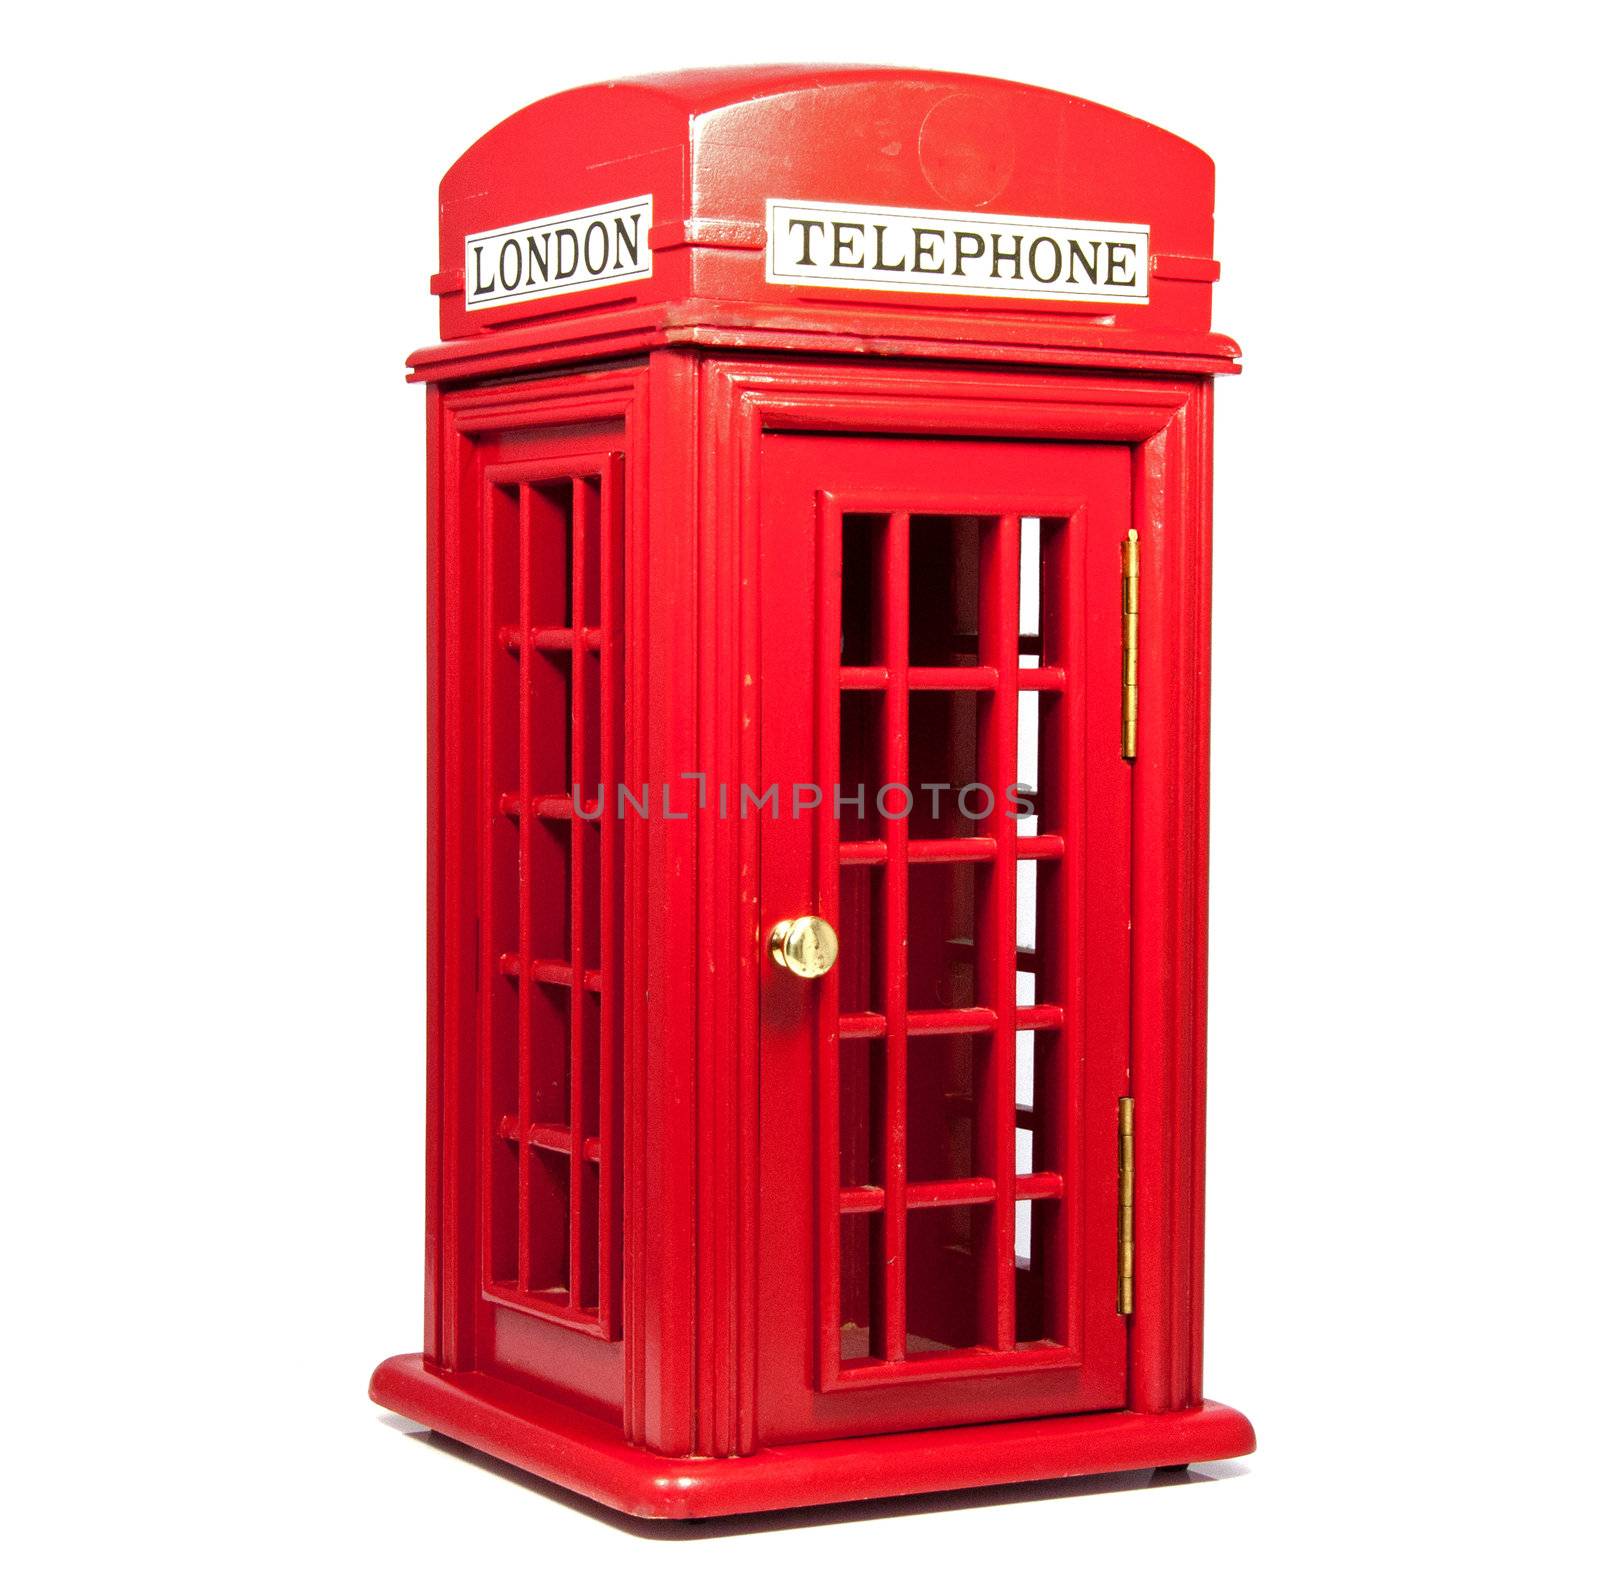 red london telephone by compuinfoto